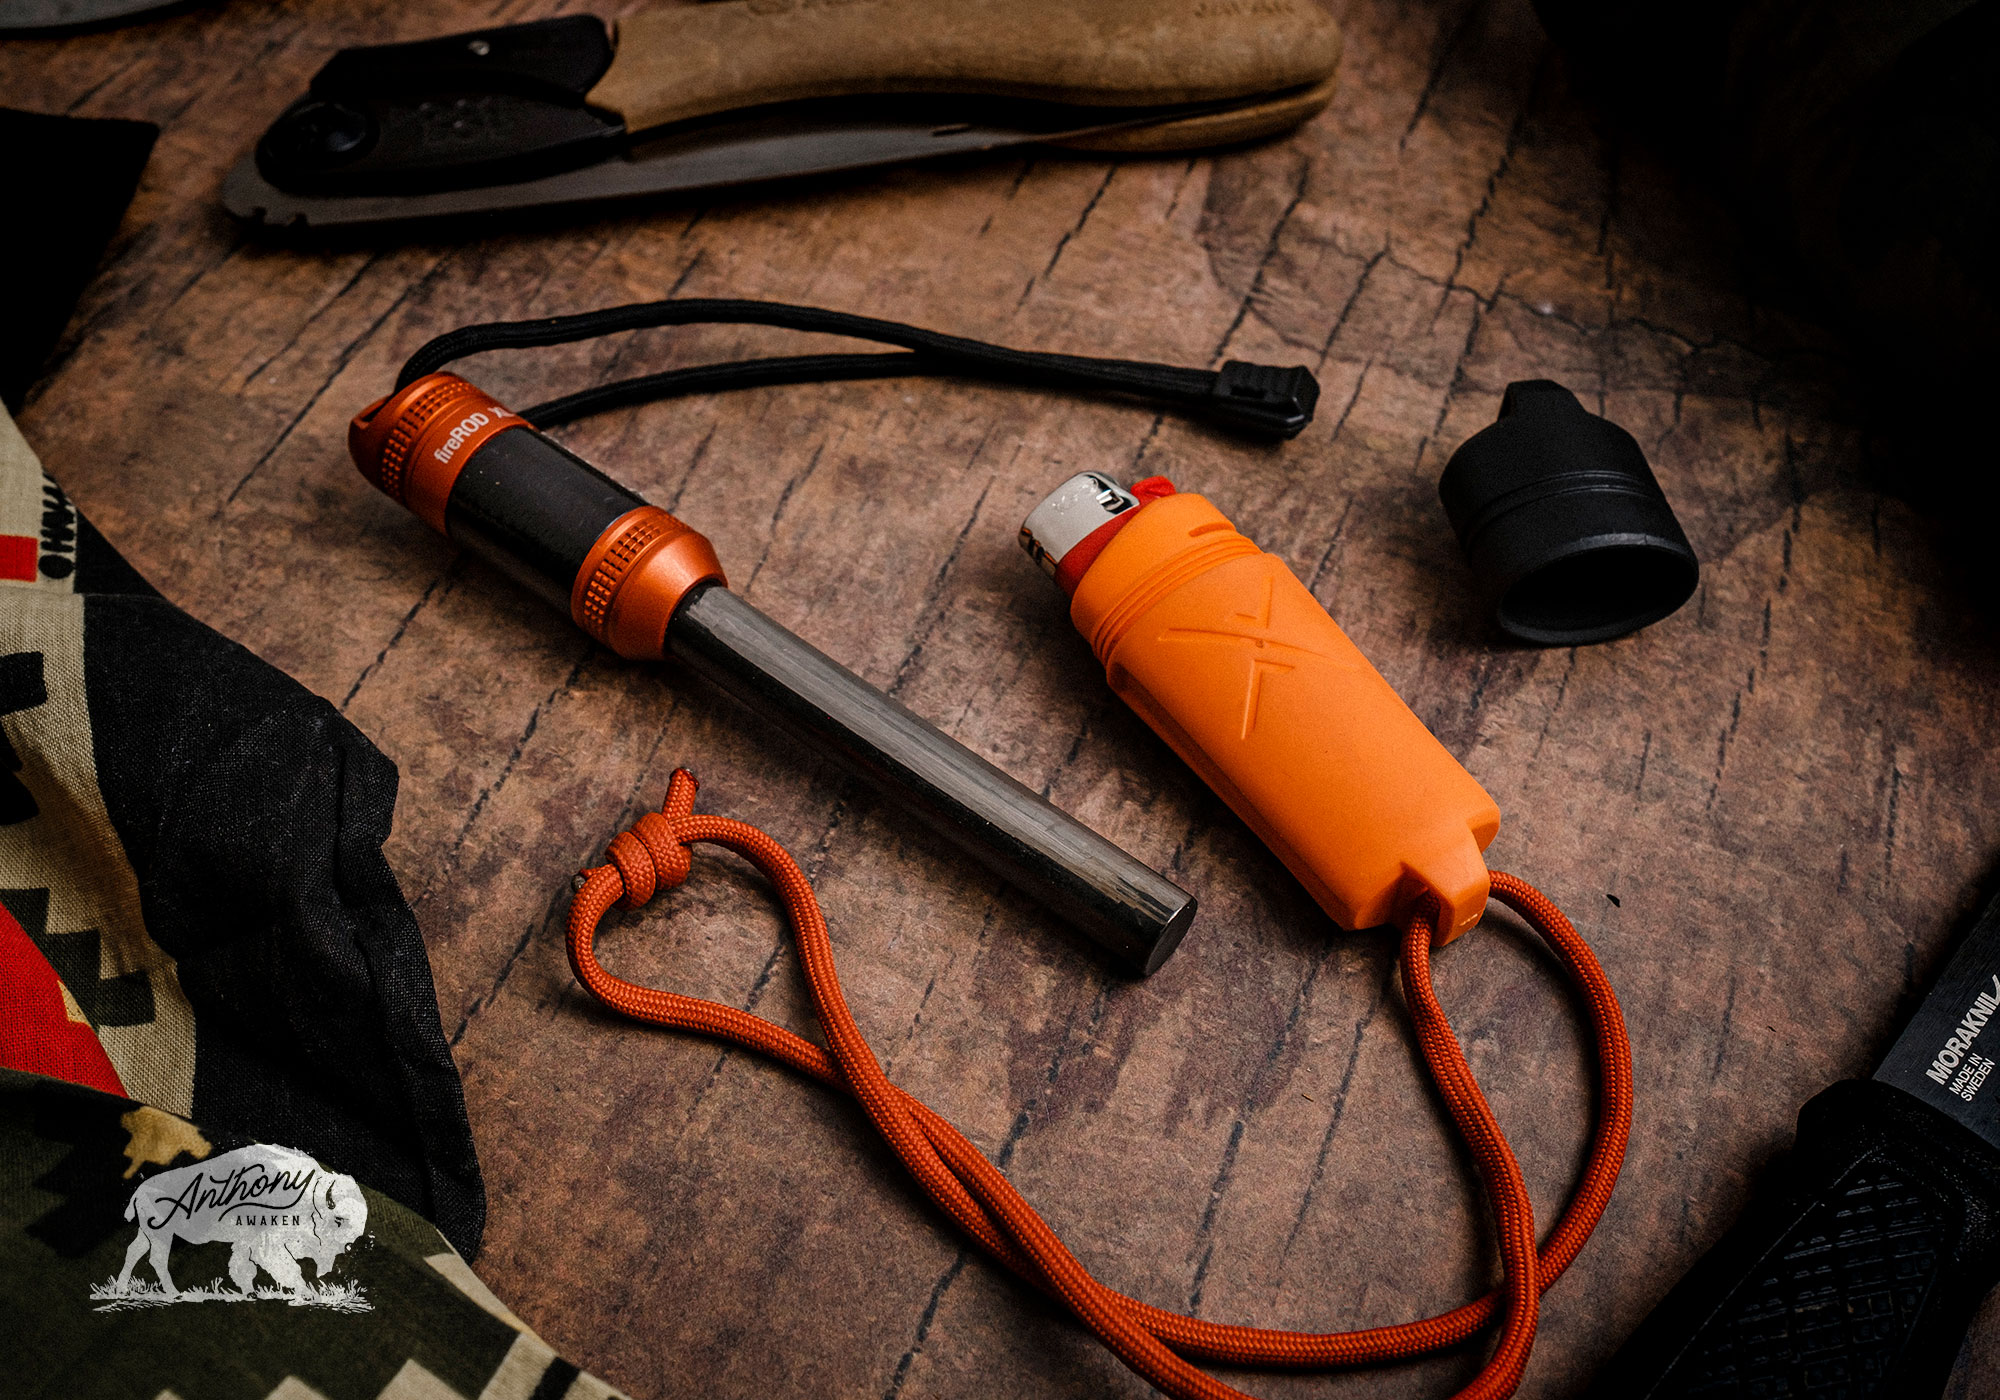 5 C Survival Kit • Thoroughly Field Tested Gear Recommendations